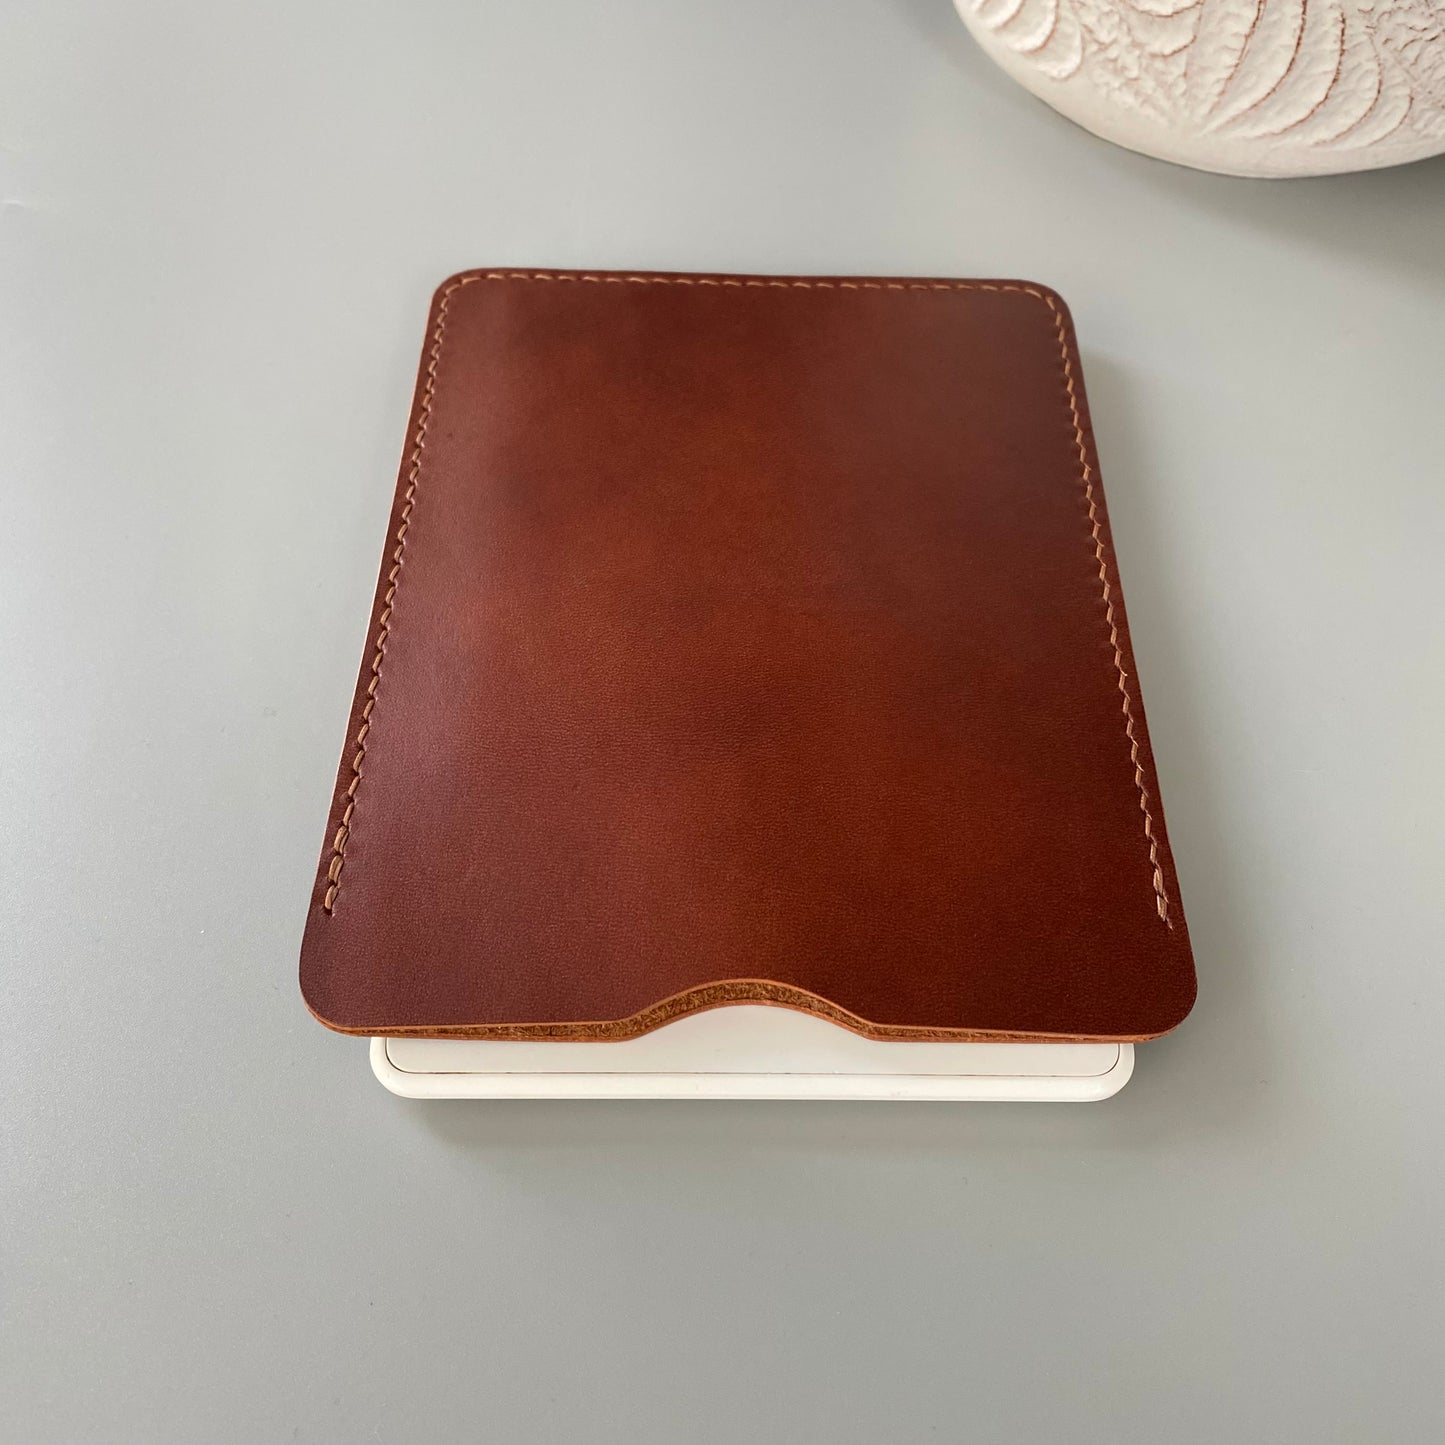 E-book reader leather case in chestnut brown